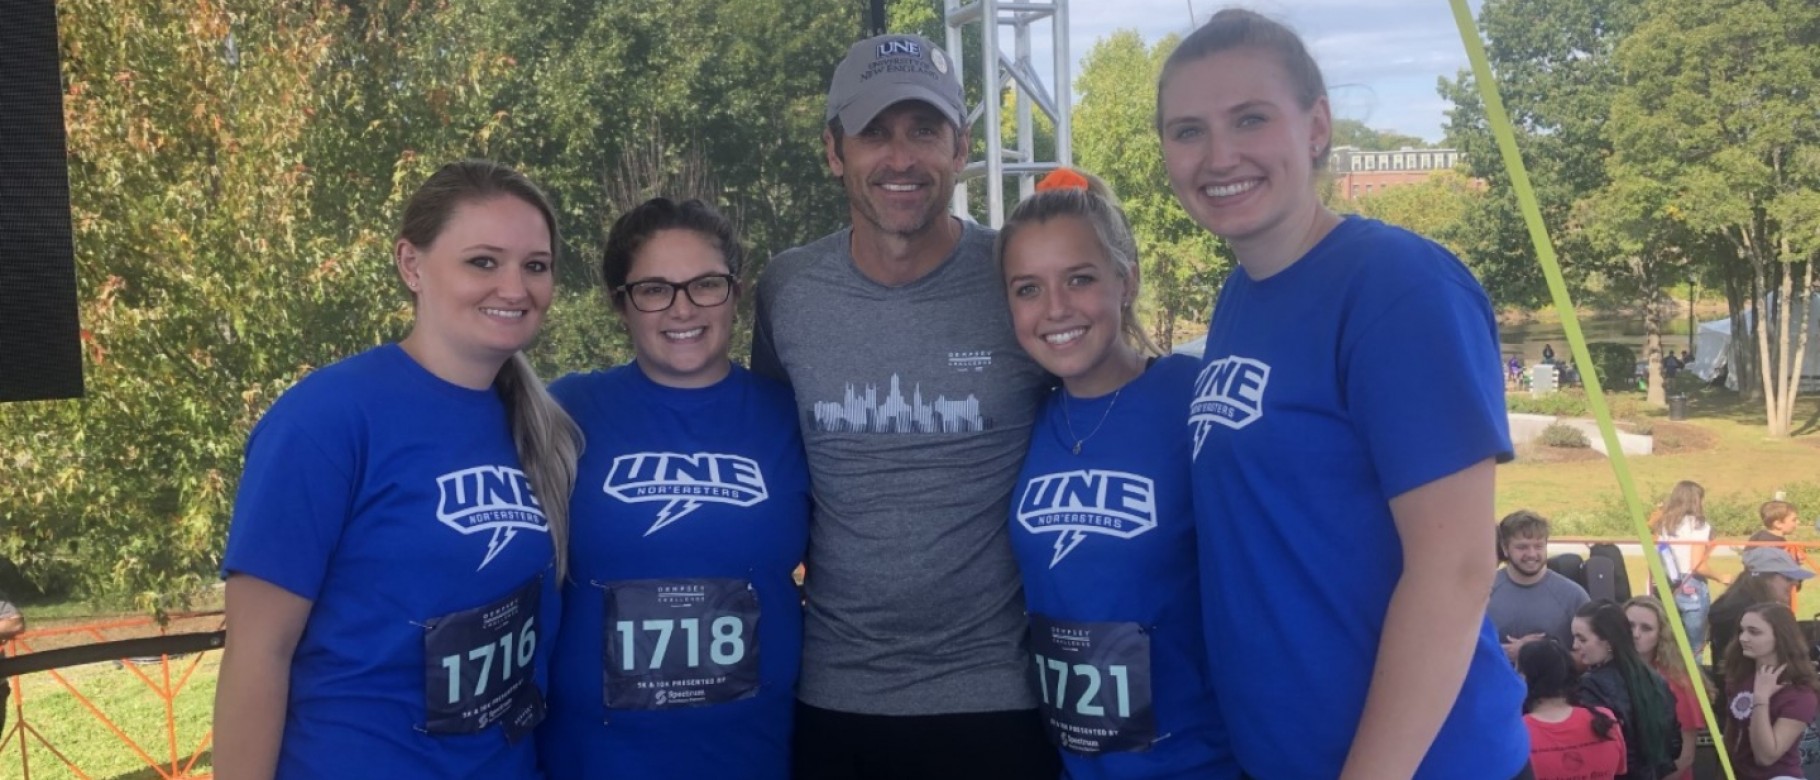 UNE students join Patrick Dempsey on stage for recognition and photos after the Dempsey Challenge